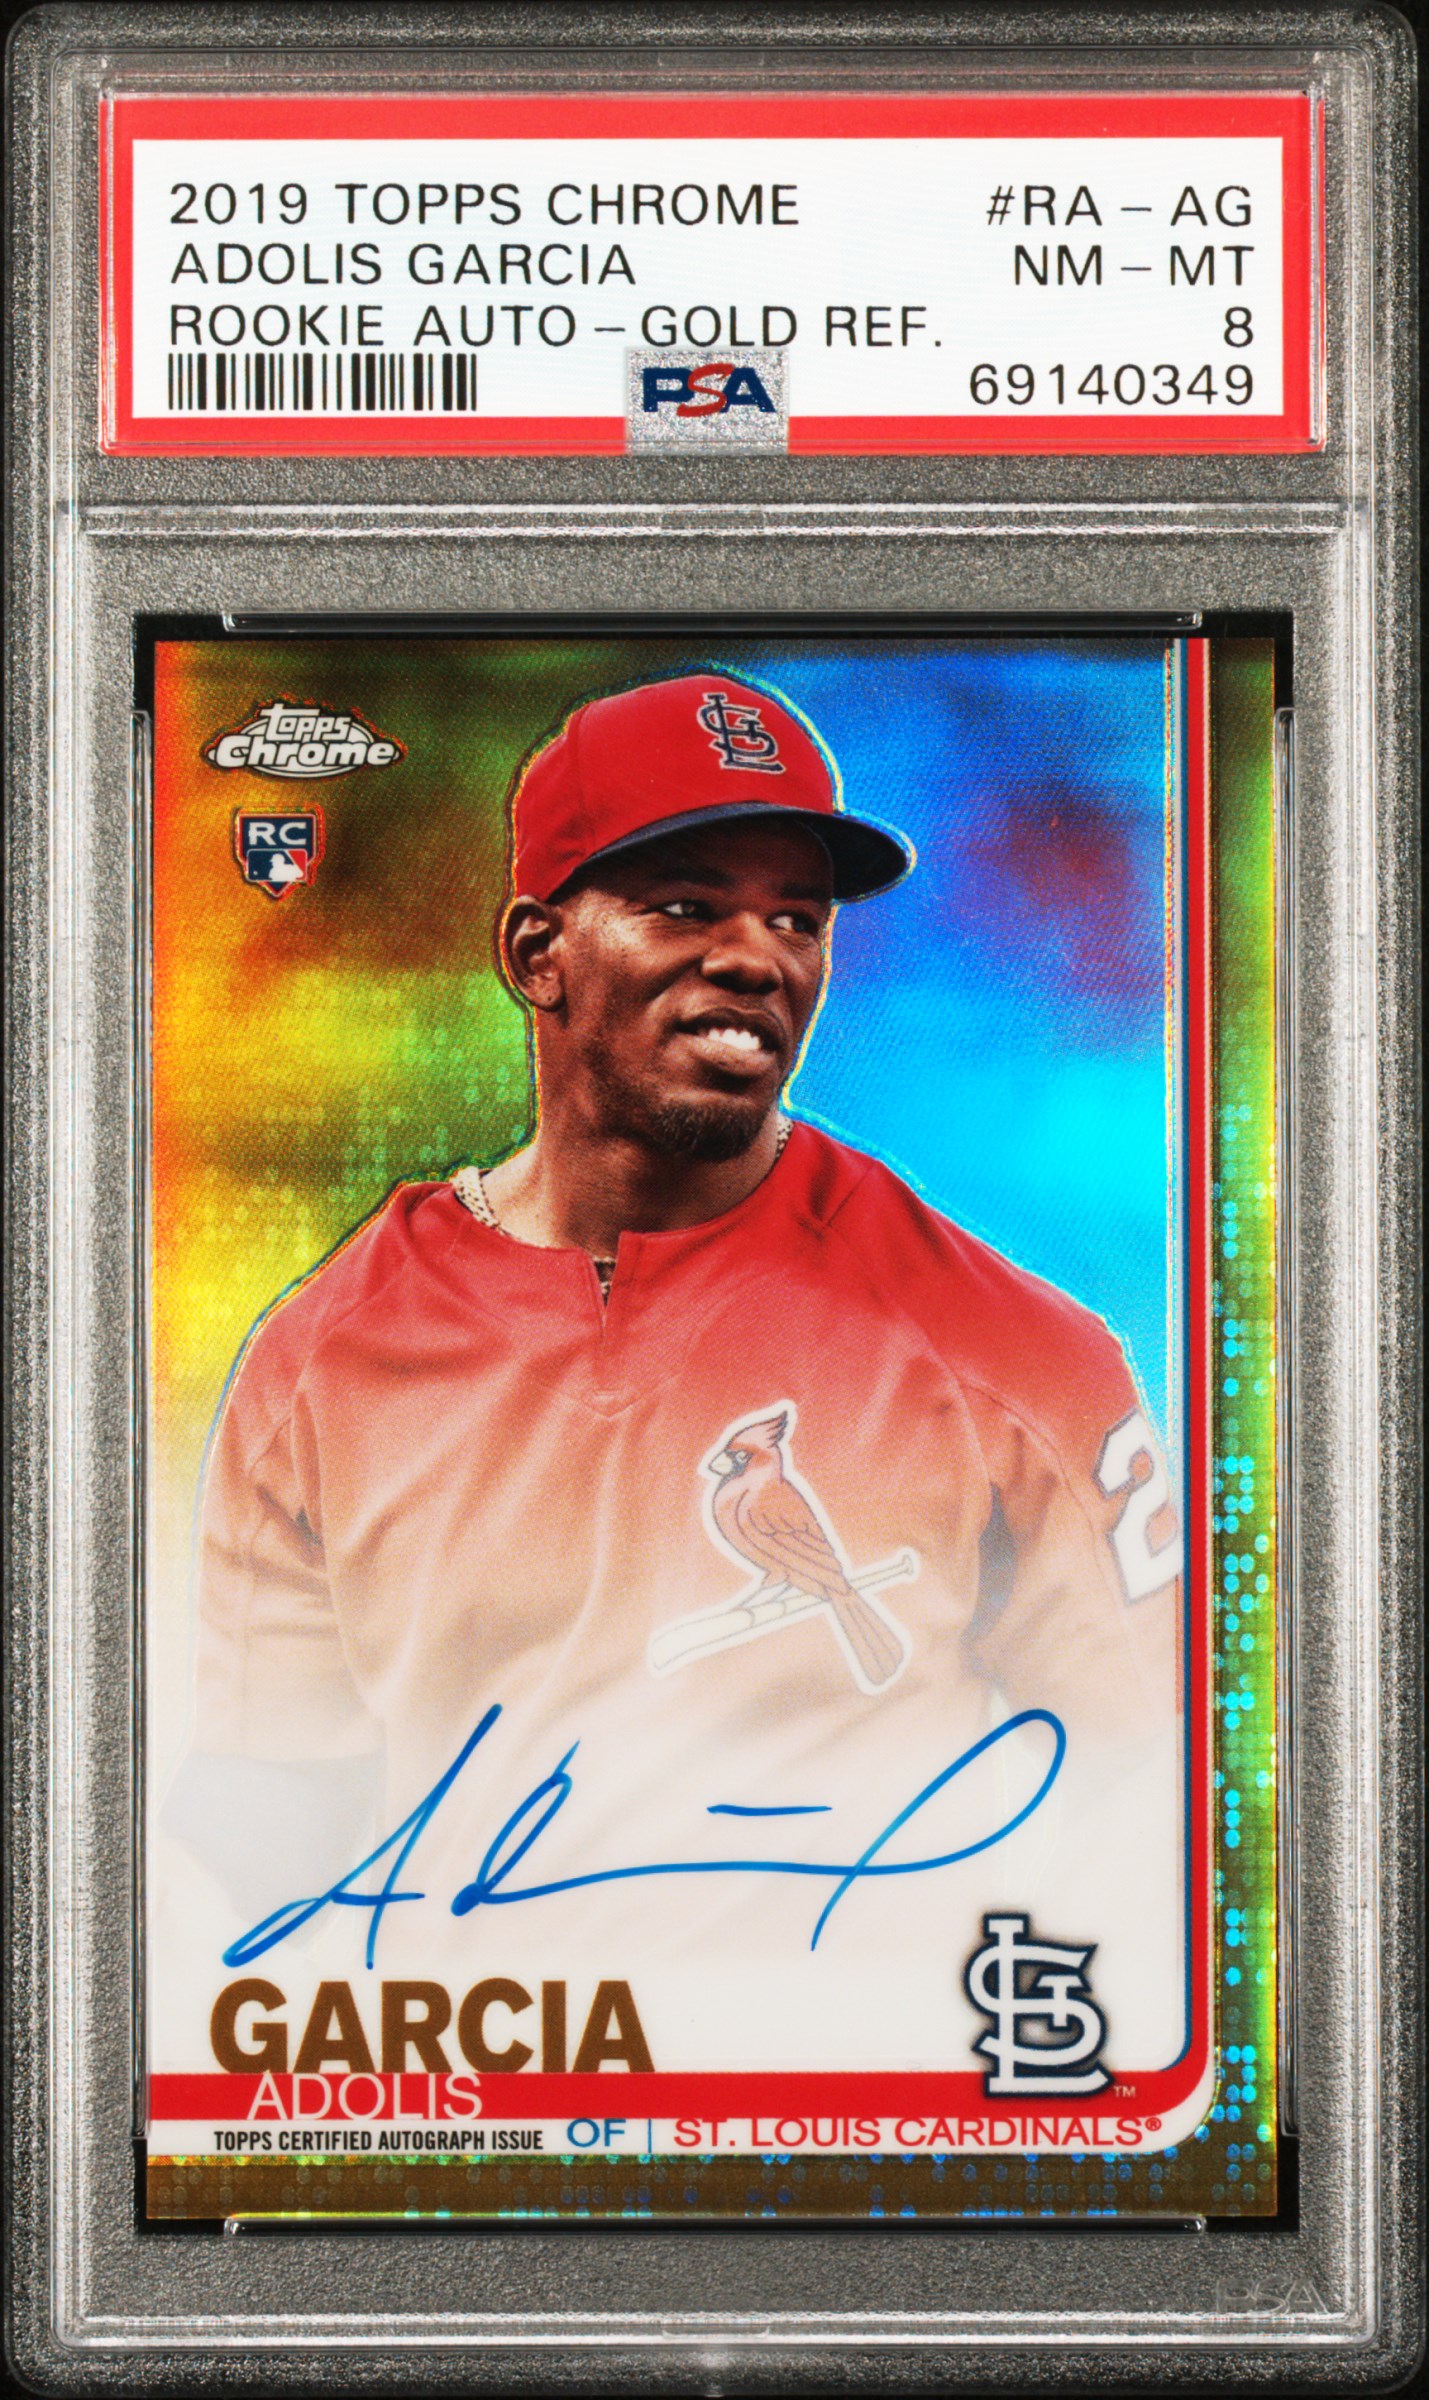 2019 Topps Chrome Rookie Autographs Gold Refractor #RA-AG Adolis Garcia Signed Rookie Card (#41/50) – PSA NM-MT 8 